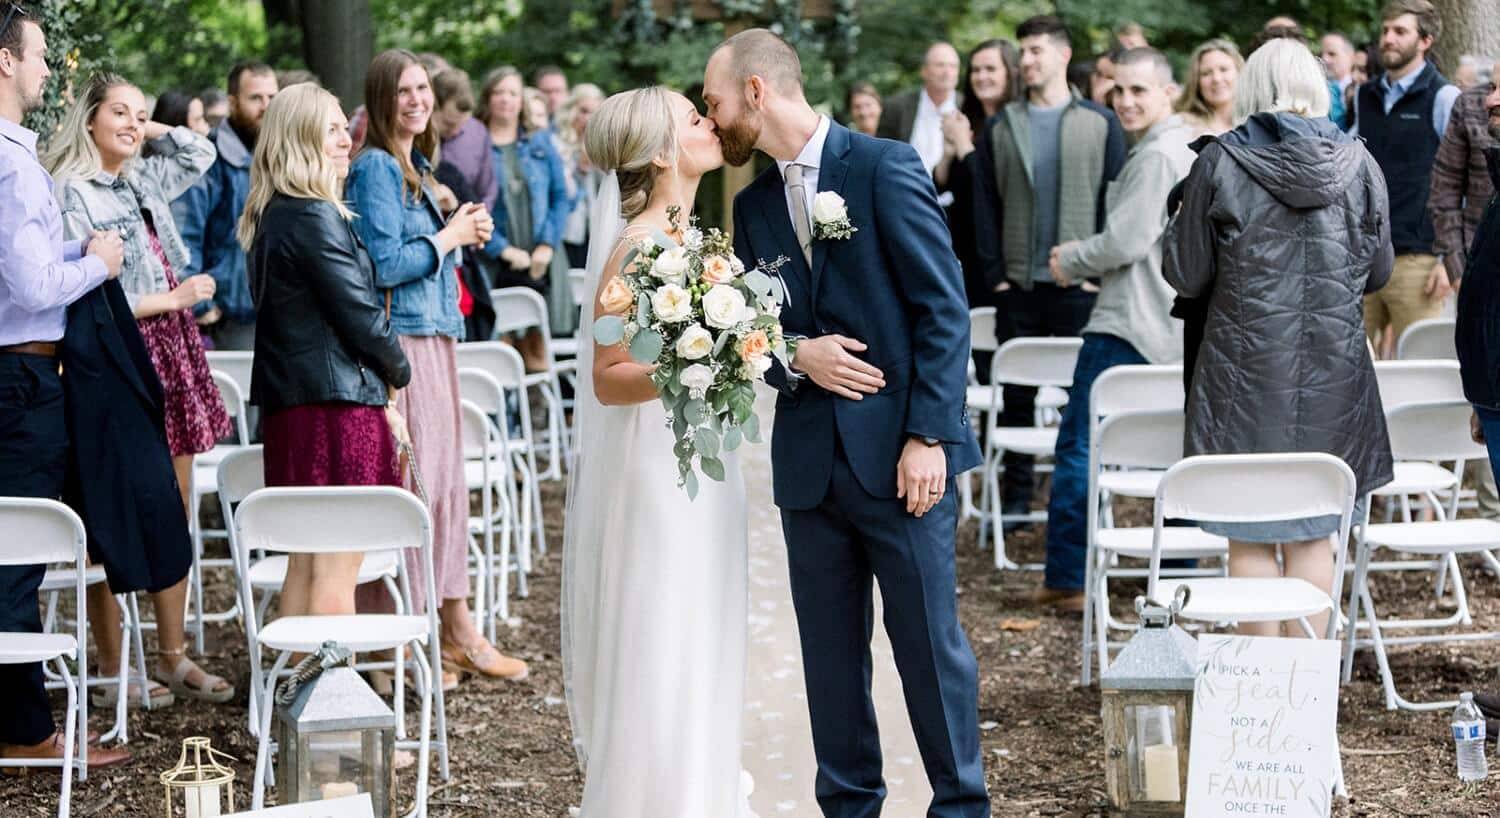 A bride and groom sharing a kiss at the end of the aisle with their guests smiling behind them